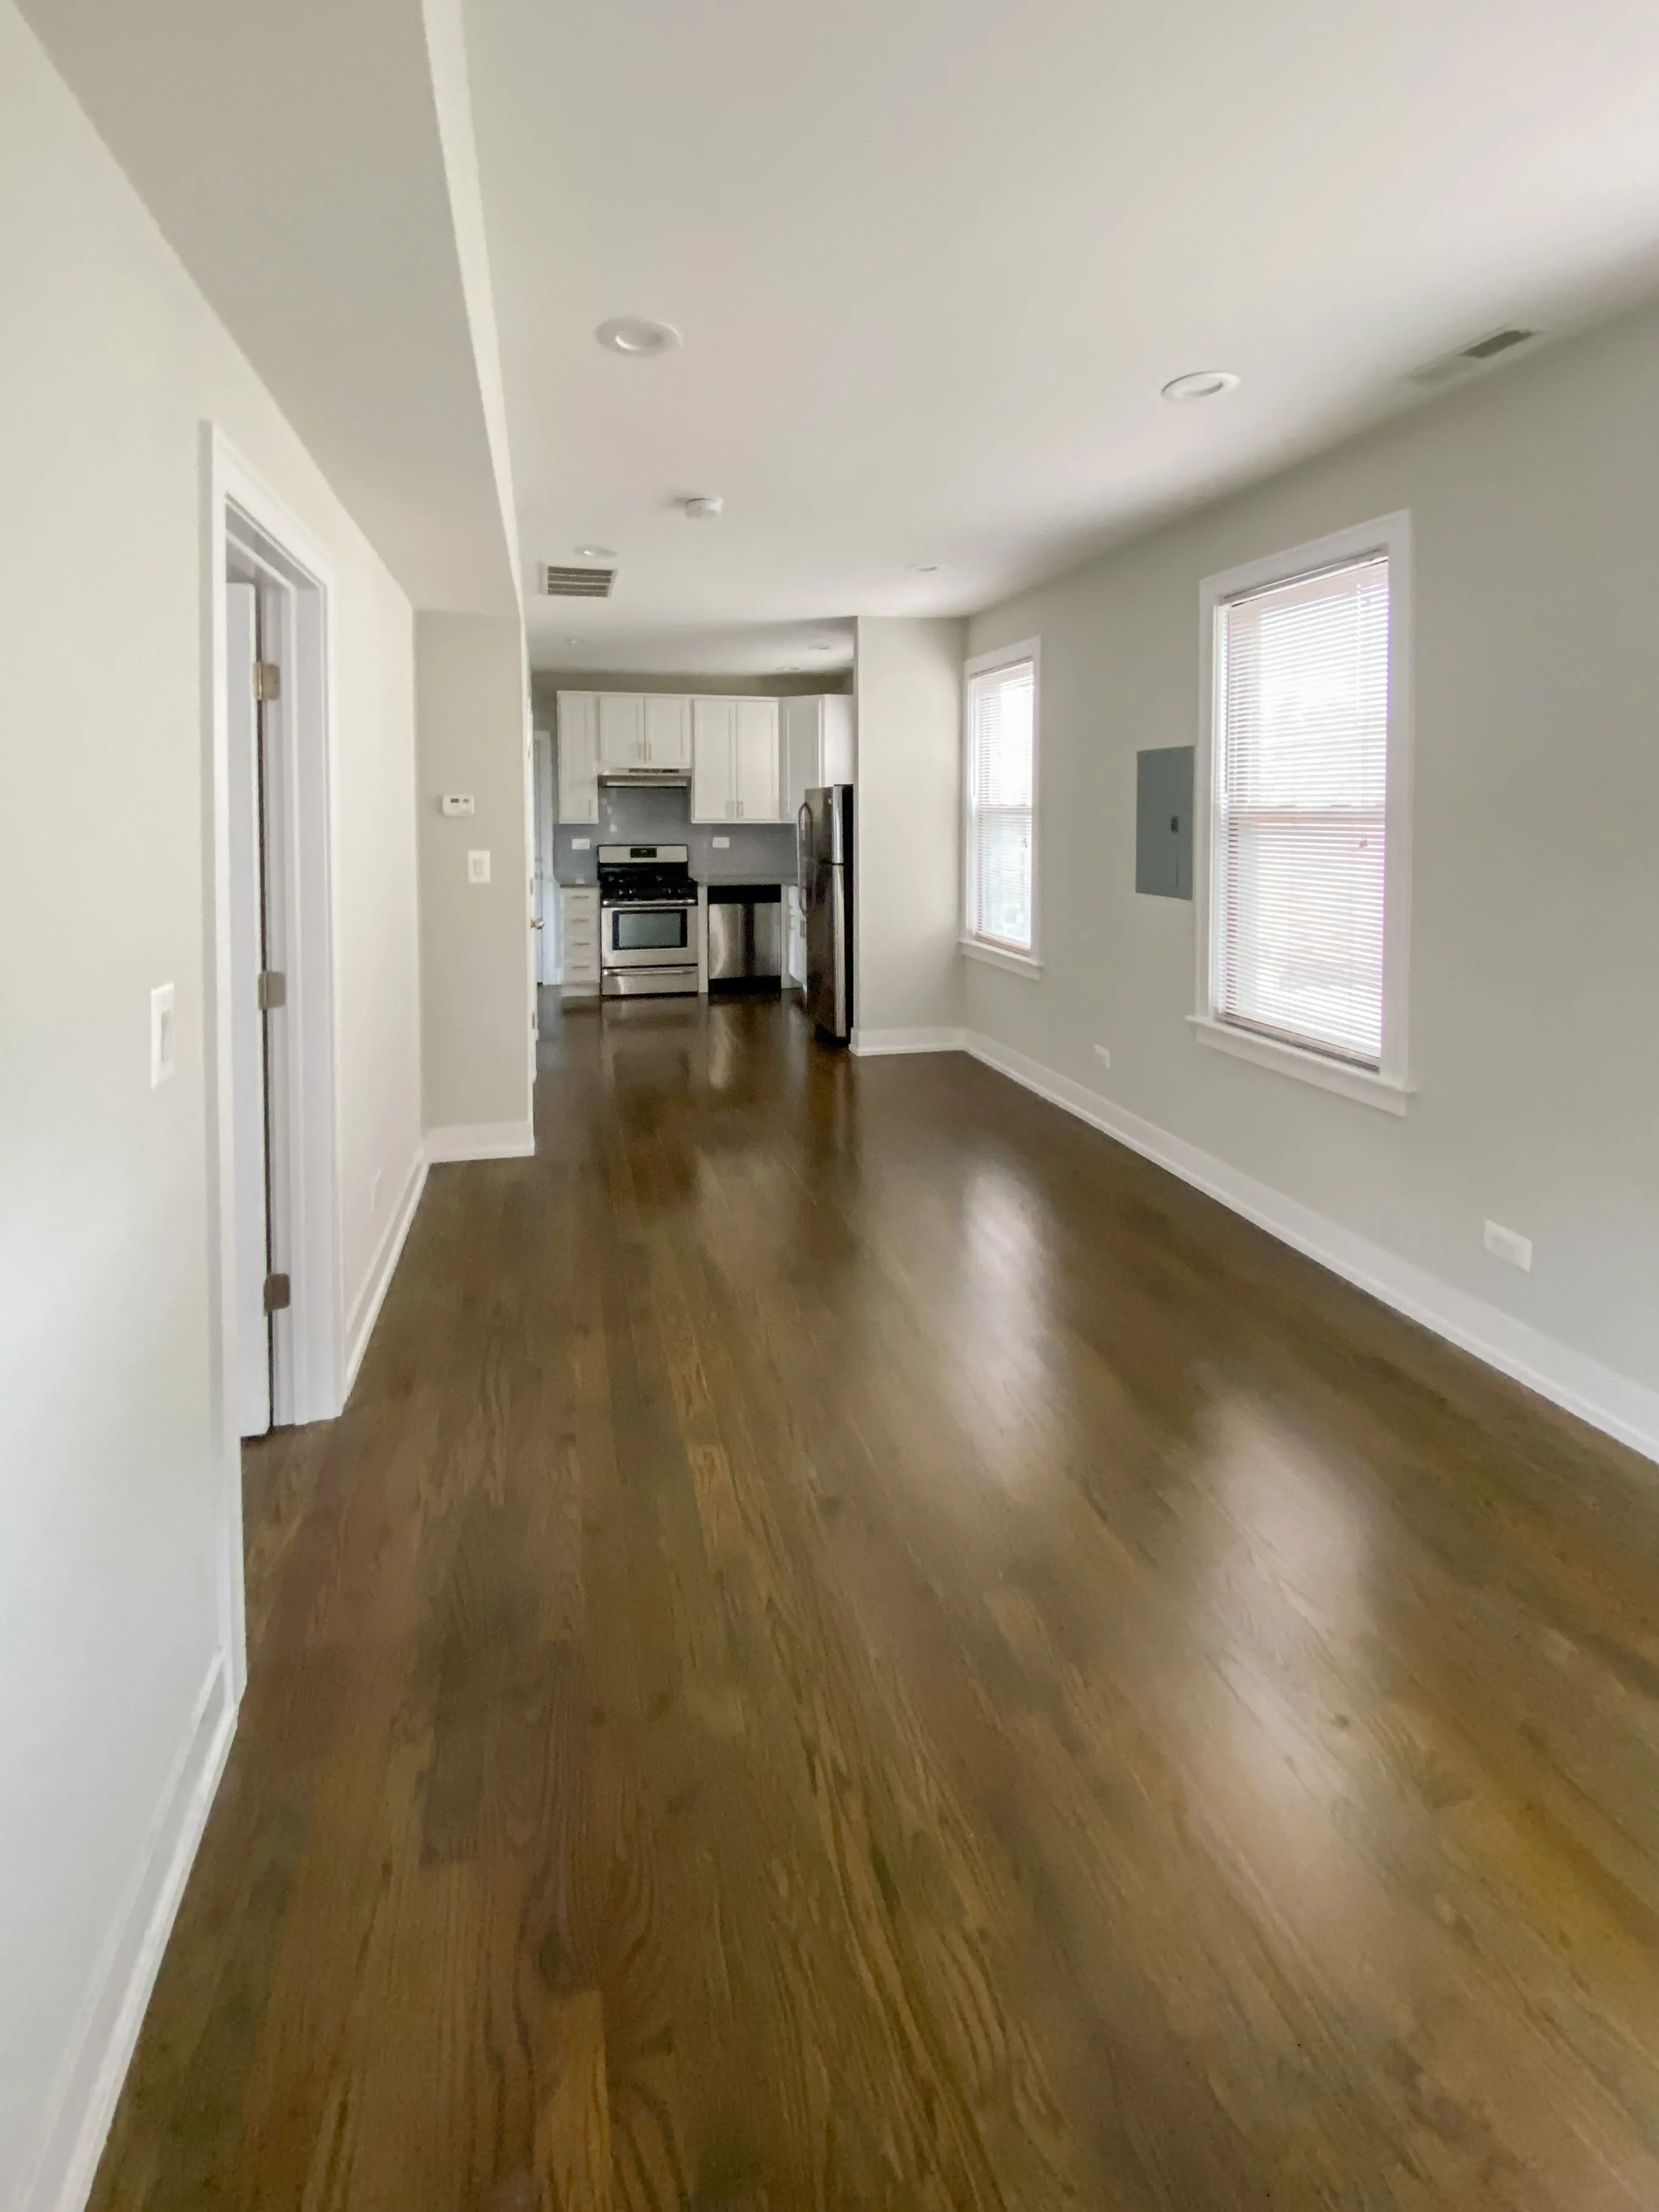 2315 N SOUTHPORT AVE 60614-unit#CH3-Chicago-IL